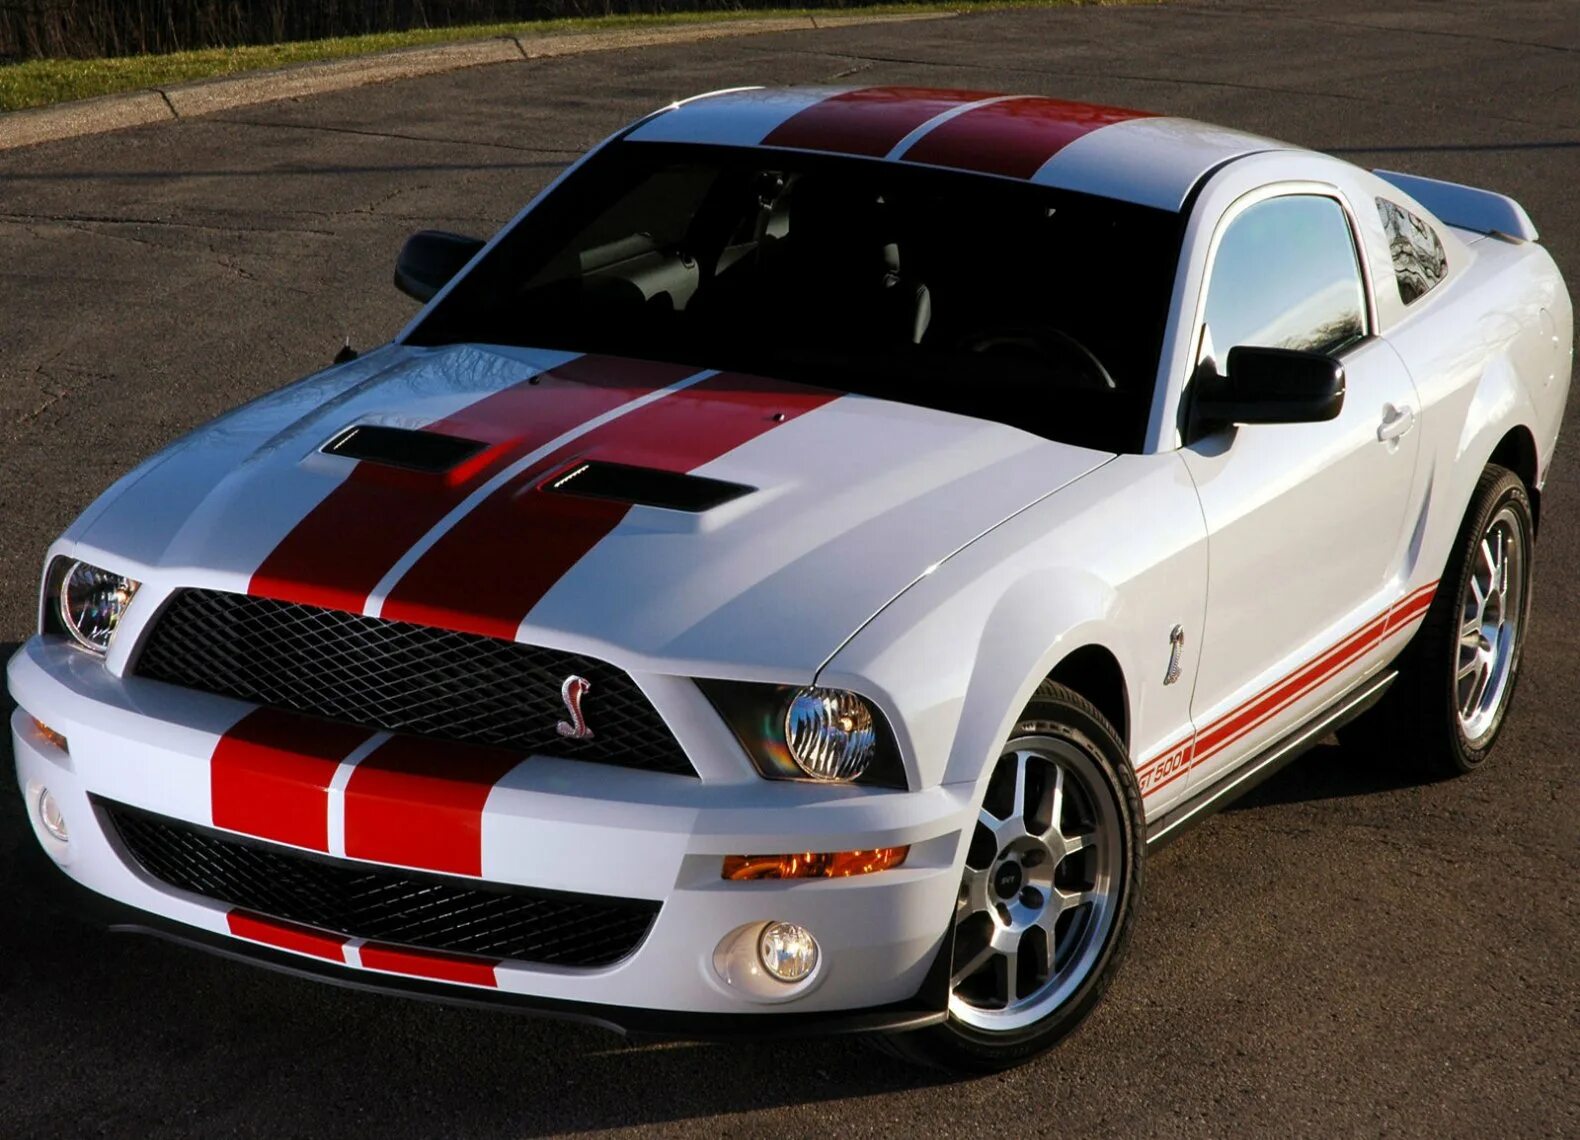 Мустанг бимка. Форд Мустанг gt 500 Shelby. Ford Shelby gt500. Mustang Shelby gt500. Ford Mustang gt500.